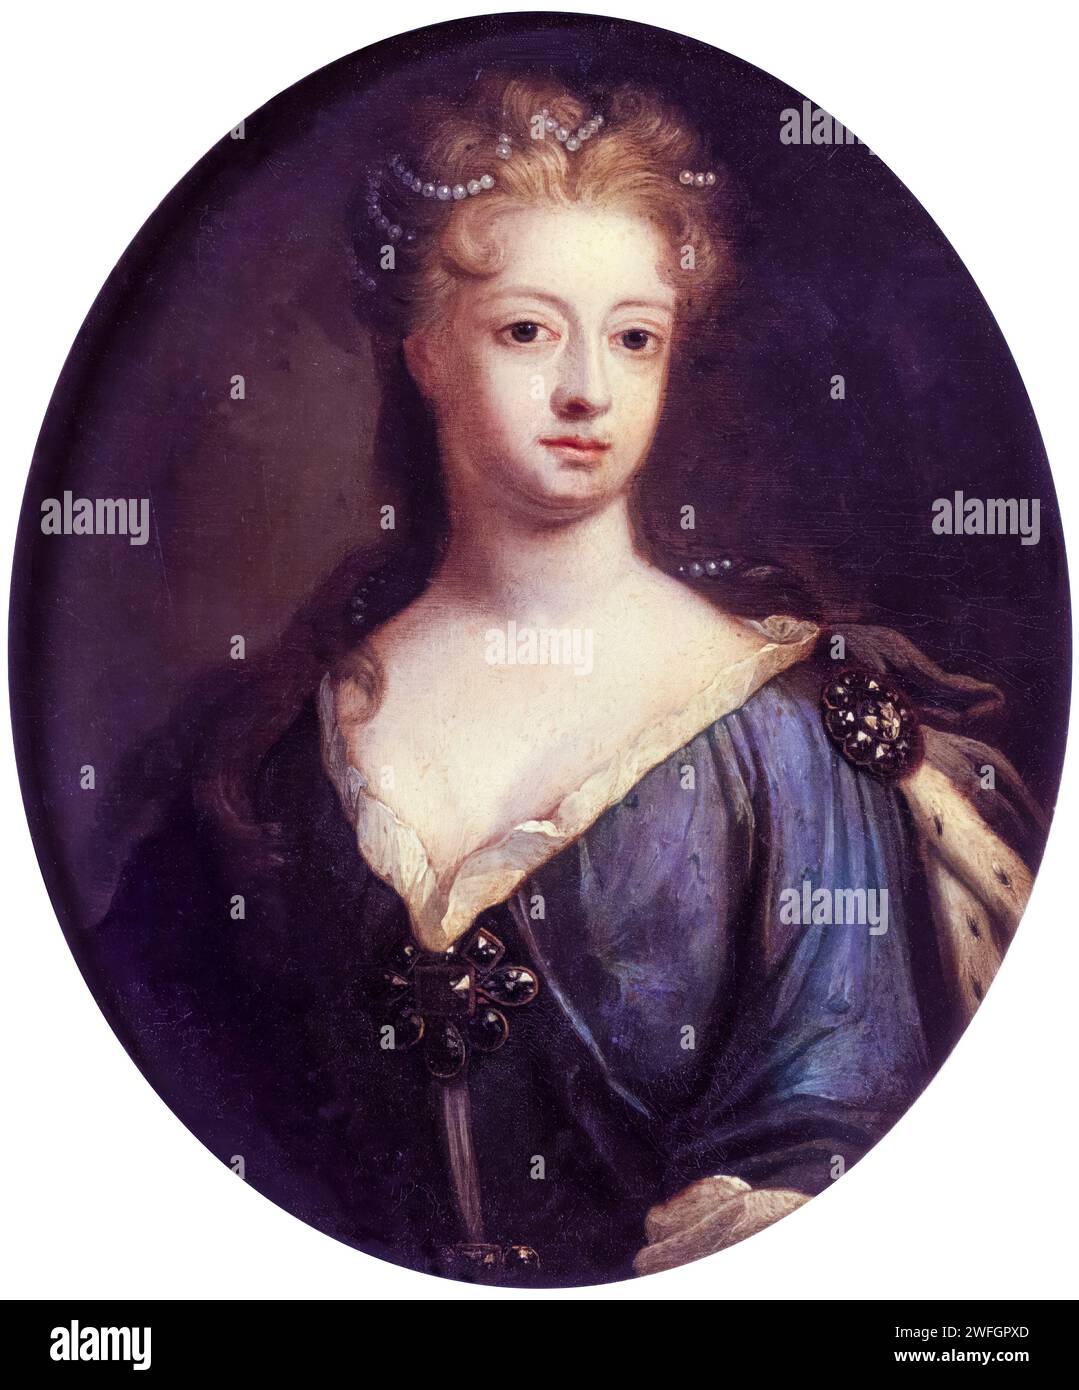 Sophia Dorothea of Hanover (1687-1757), Queen Consort of Prussia and Electress of Brandenburg (1713-1740), portrait painting in oil on copper after Johann Leonhard Hirschmann, 1706 Stock Photo